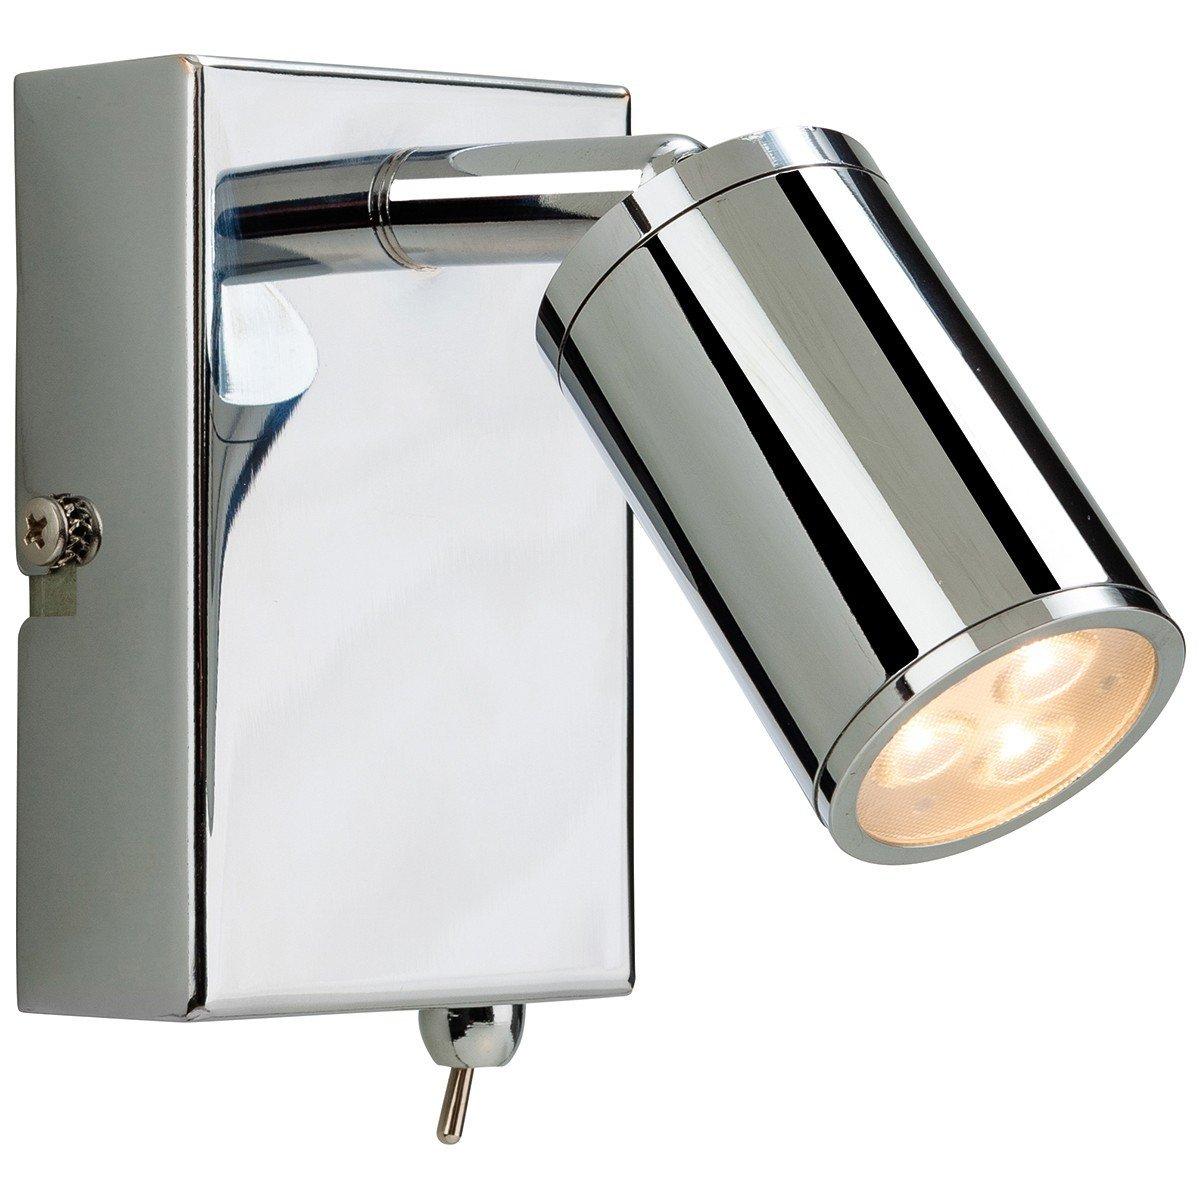 Orion LED 3 Light Indoor Wall Spotlight (Switched) Chrome